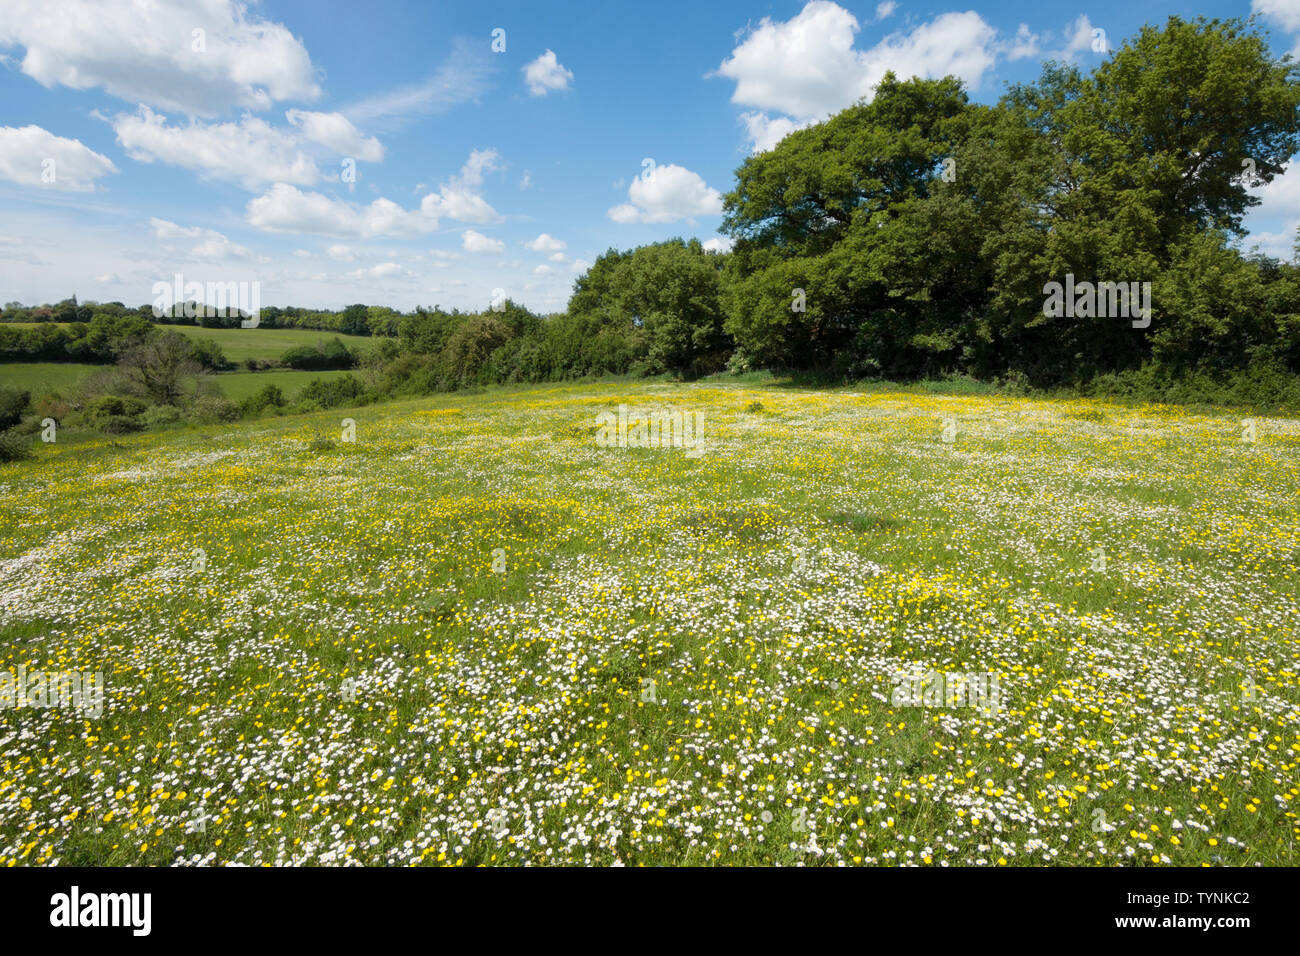 wild flower meadow, field of wild flowers, Bulbous Buttercup, Ranunculus bulbosus, and Daisy, Bellis perennis, Essex, UK, May Stock Photo